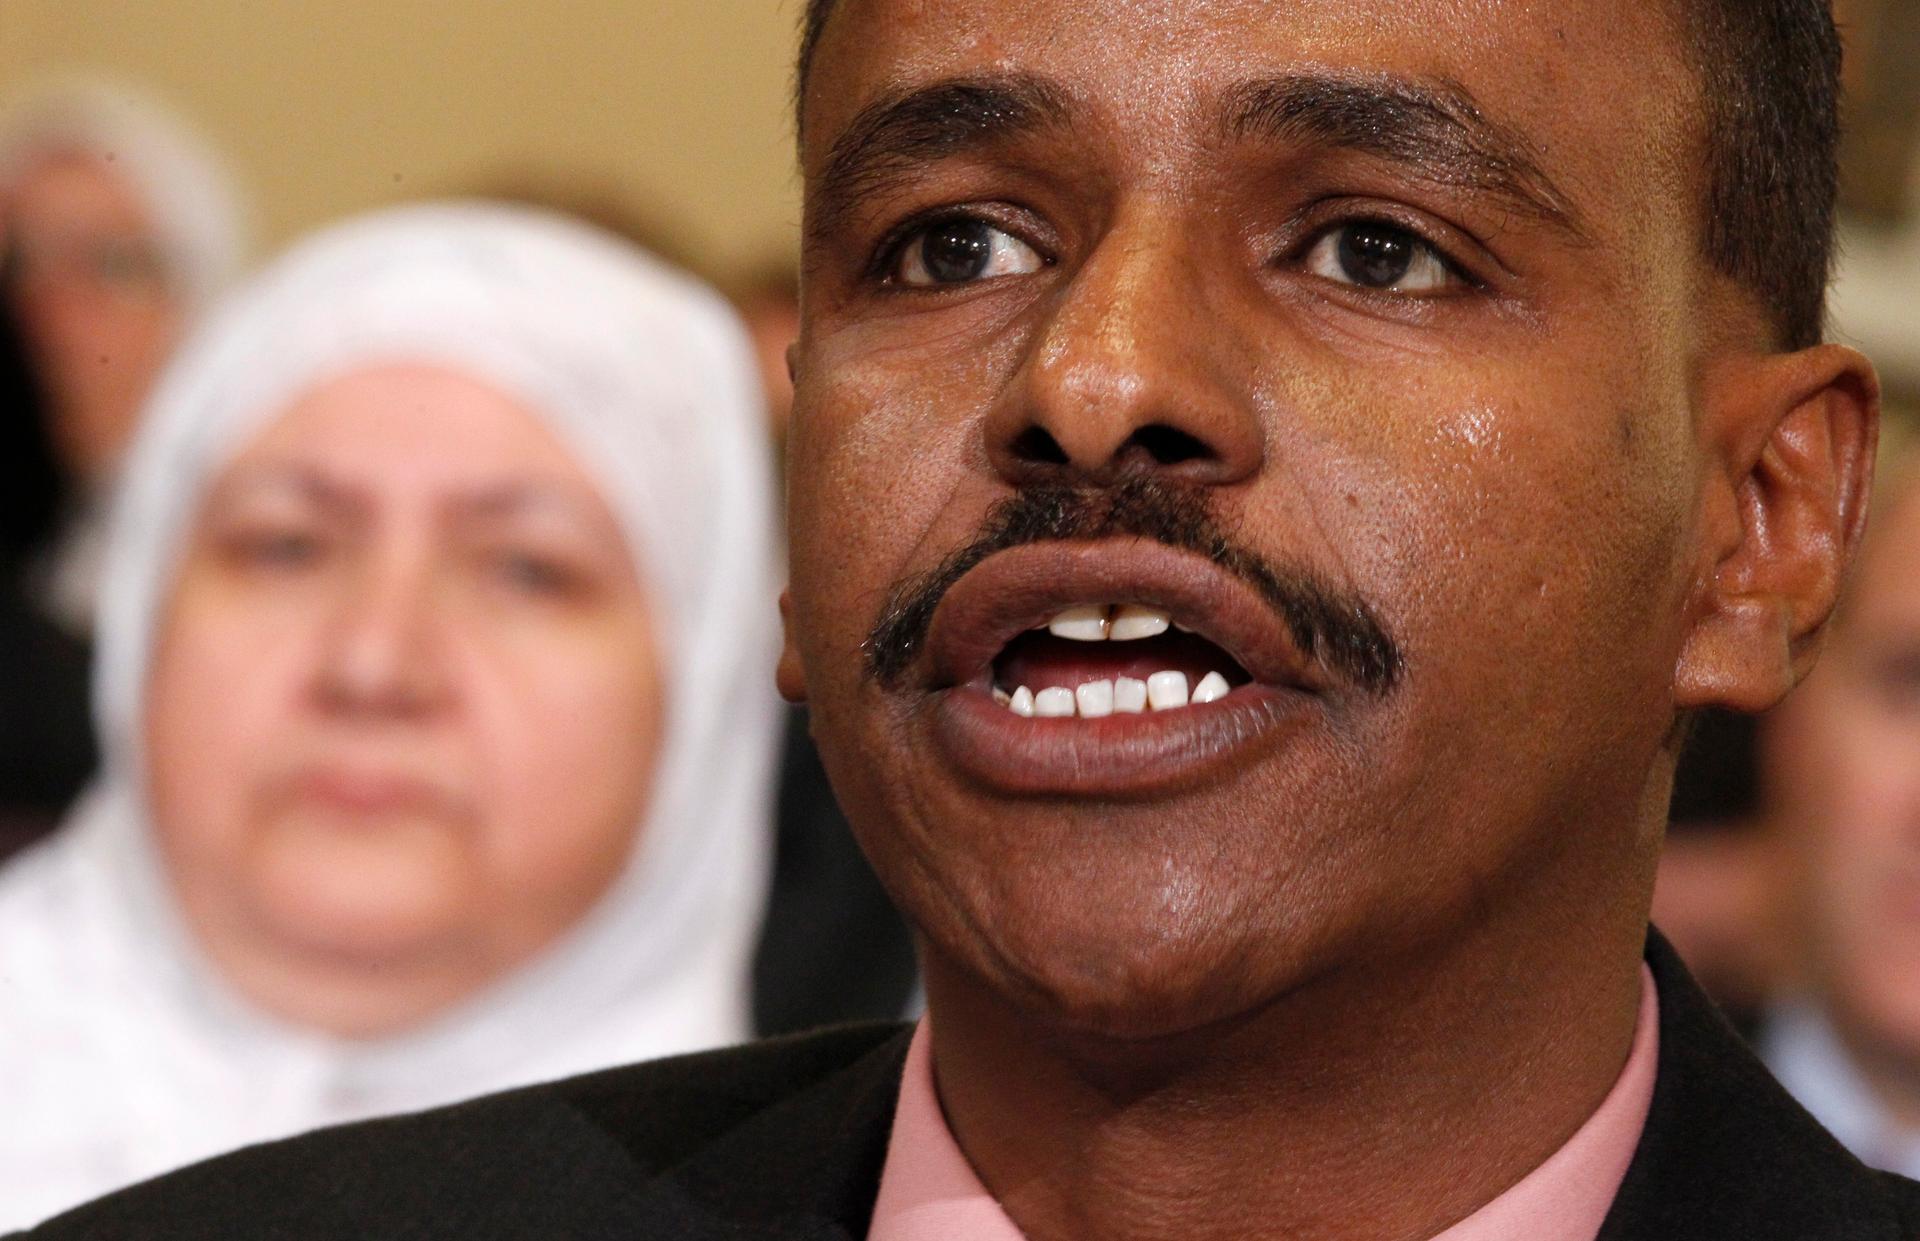 Abdirizak Bihi, who directs the Somali Education and Social Advocacy Center in Minnesota, testifies at a congressional hearing on radicalization in Washington. Bihi's nephew left Minnesota to fight with al-Shabab in 2008.